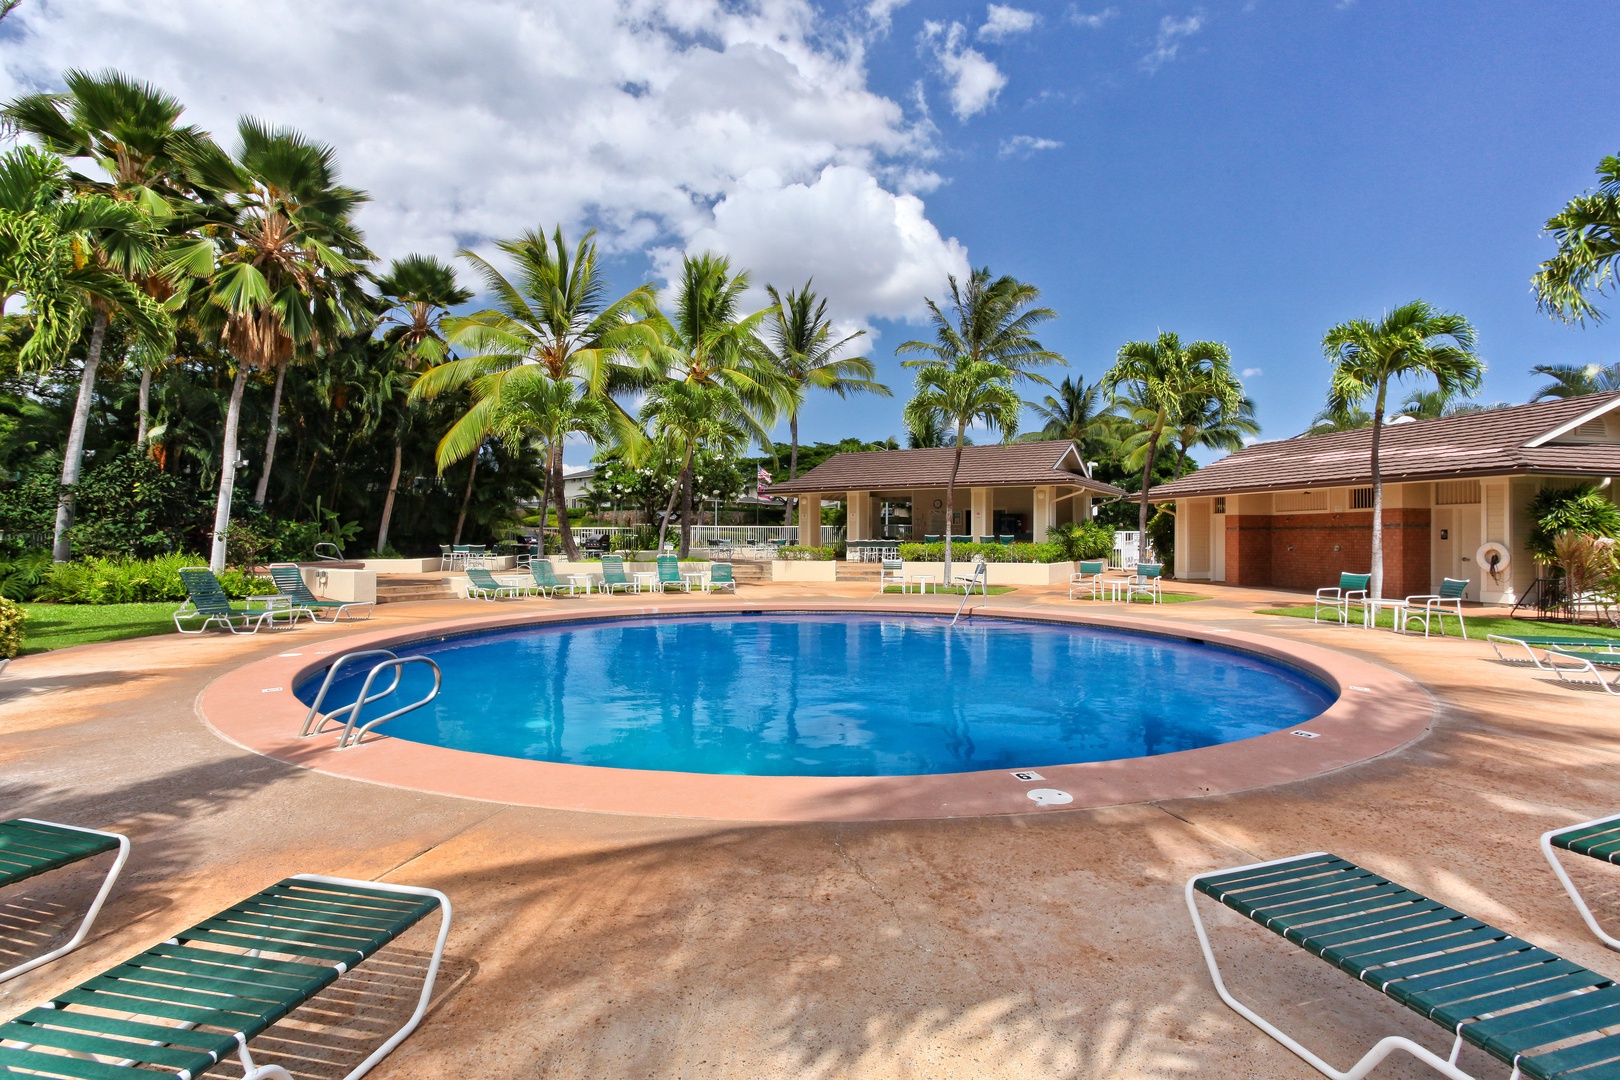 Kapolei Vacation Rentals, Fairways at Ko Olina 18C - Relax by the community pool with your favorite book.